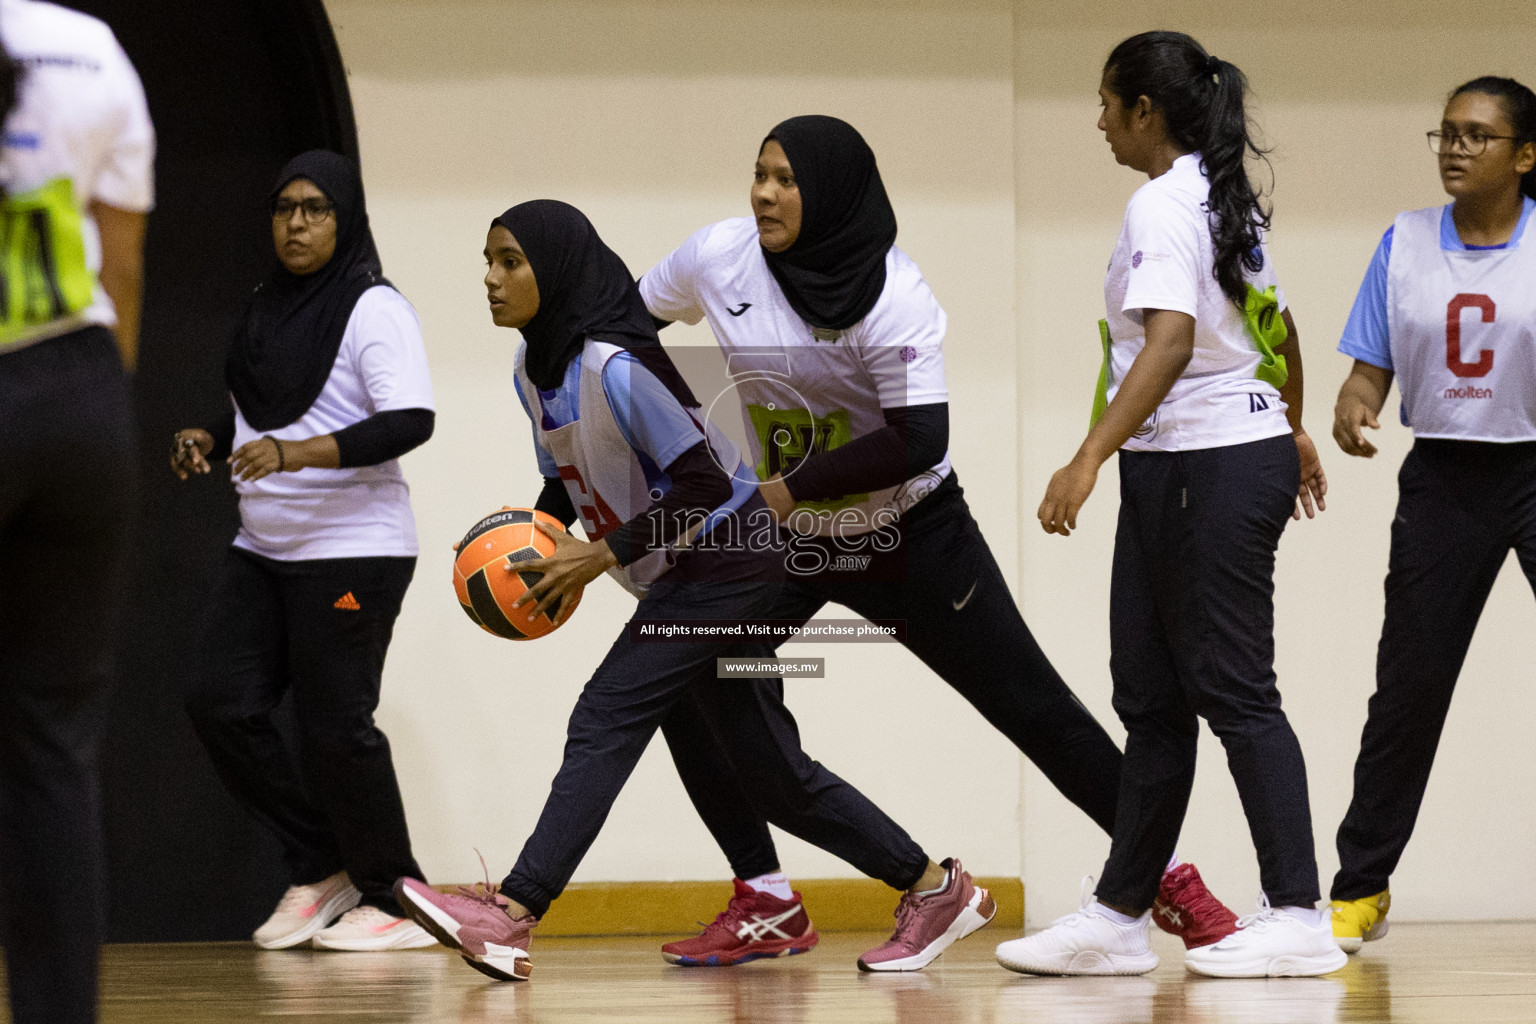 Club Green Streets vs Mahibadhoo in the Milo National Netball Tournament 2022 on 20 July 2022, held in Social Center, Male', Maldives. Photographer: Shuu / Images.mv